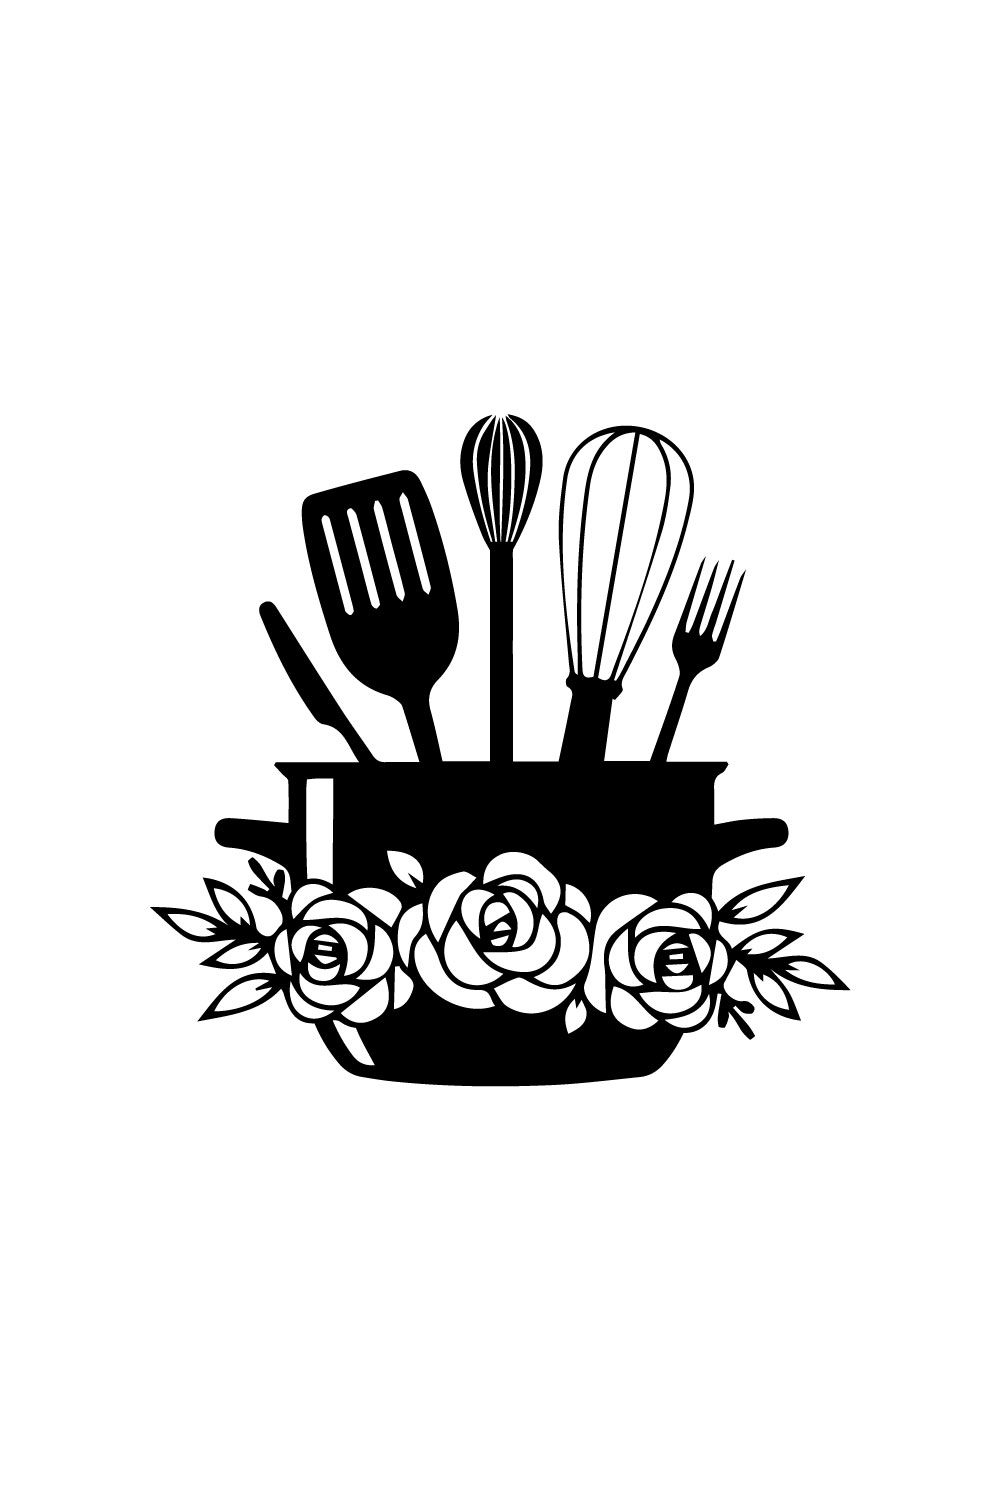 Free spoon floral logo pinterest preview image.